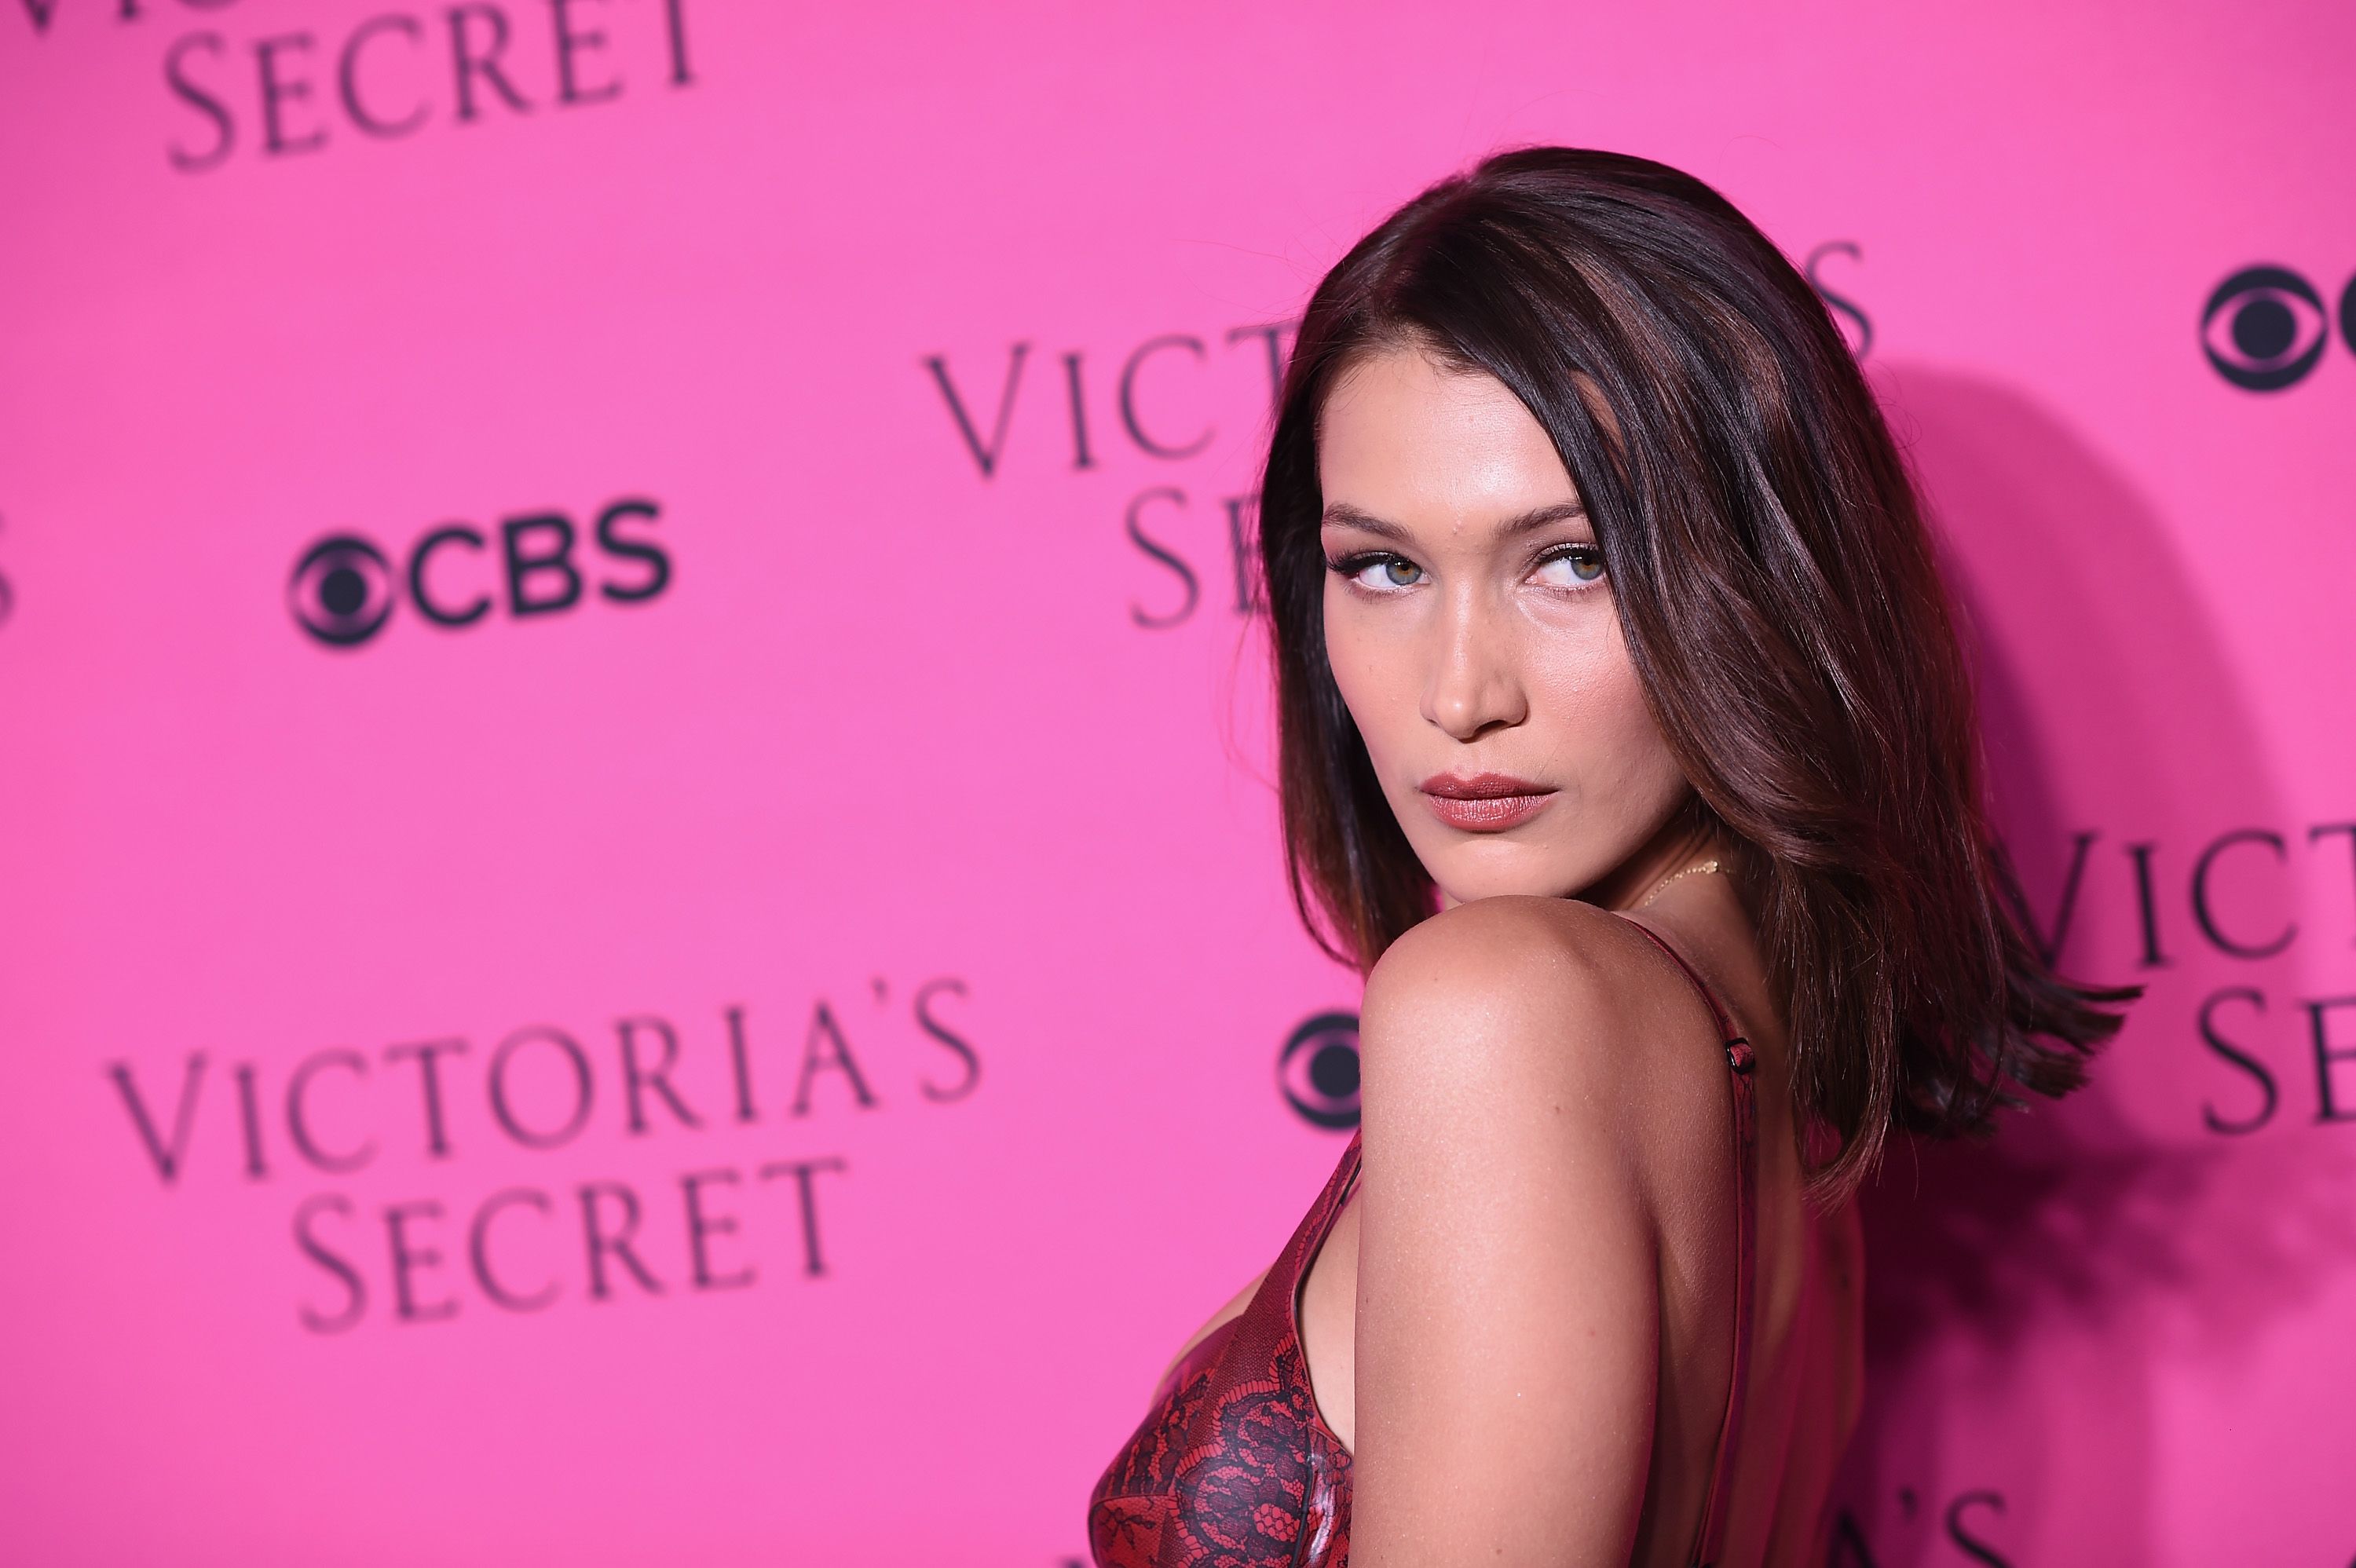 Bella Hadid at the Victoria's Secret Angels intimate viewing party of the 2017 Victoria's Secret Fashion Show at Spring Studios on November 28, 2017 in New York City. | Source: Getty Images